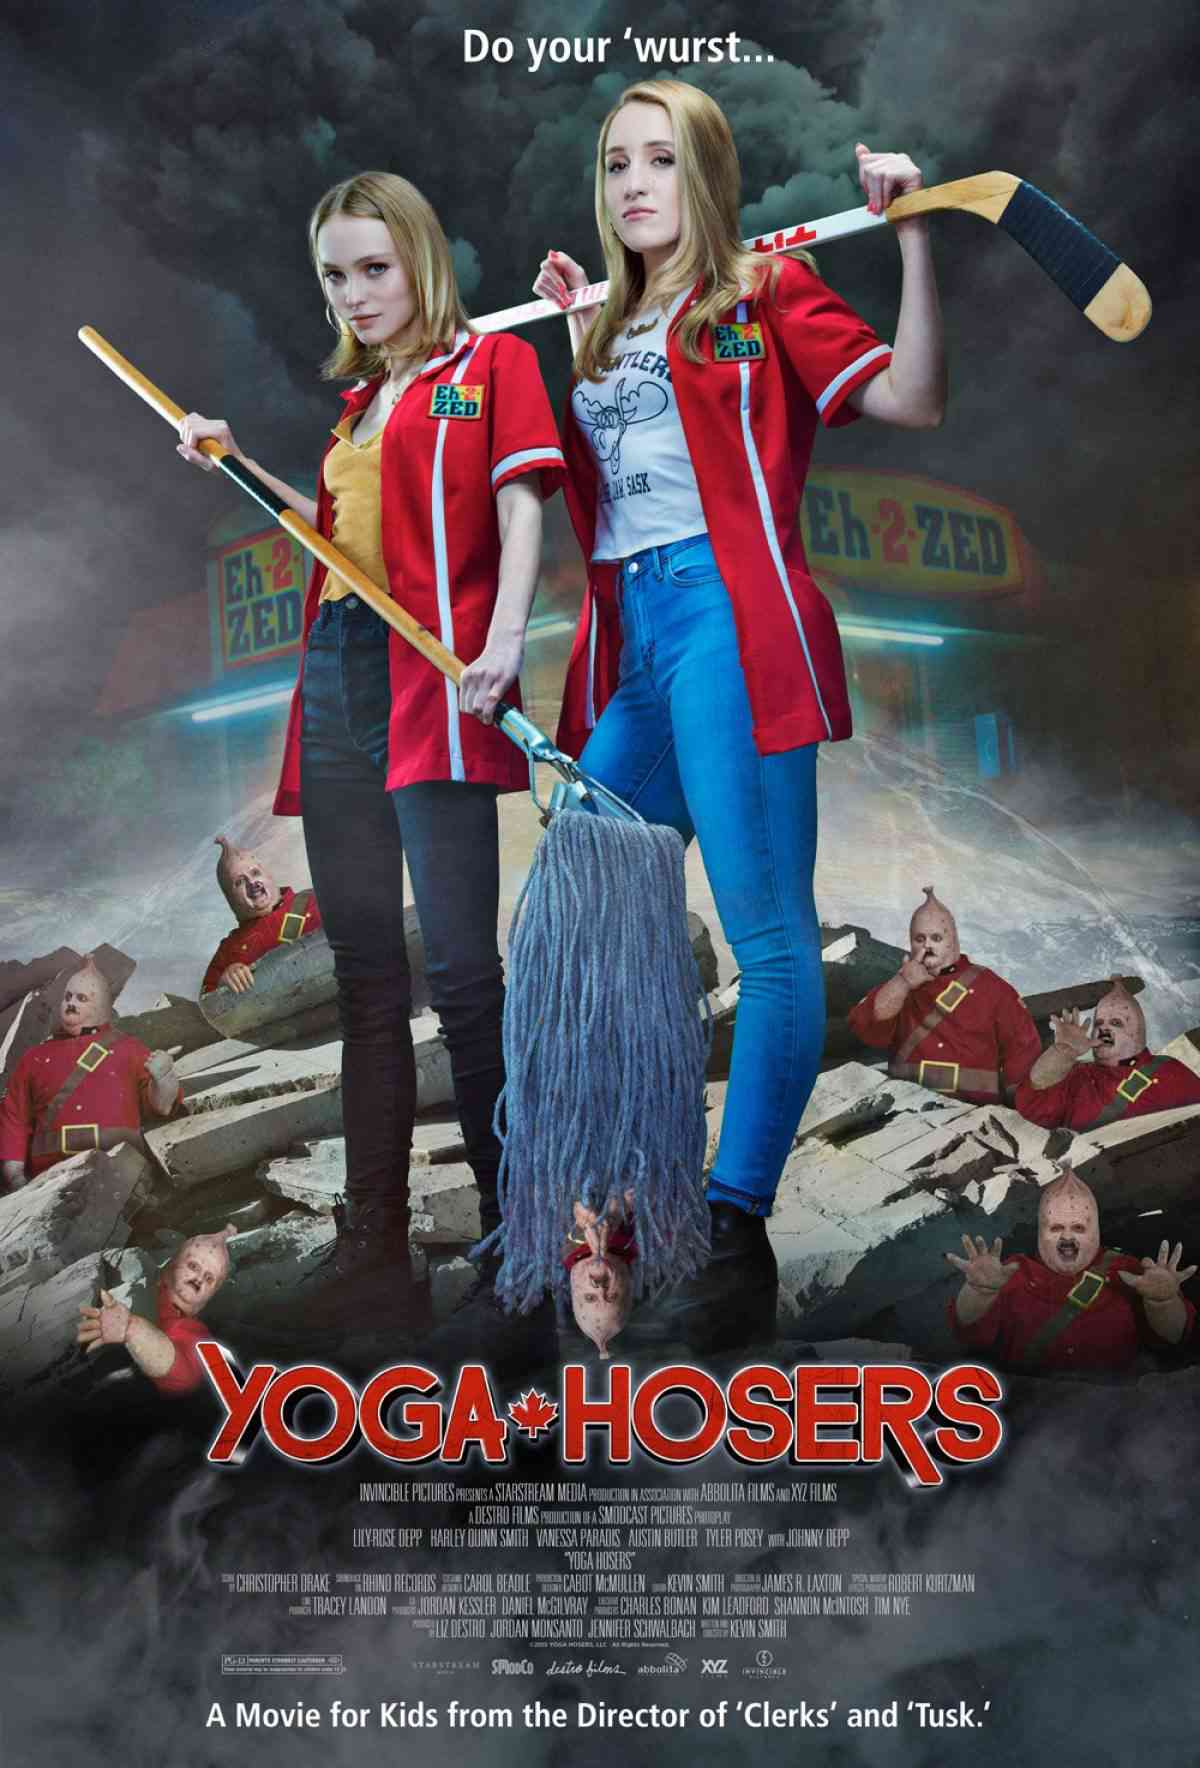 Yoga Hosers Movie Wiki Story, Trailer Review